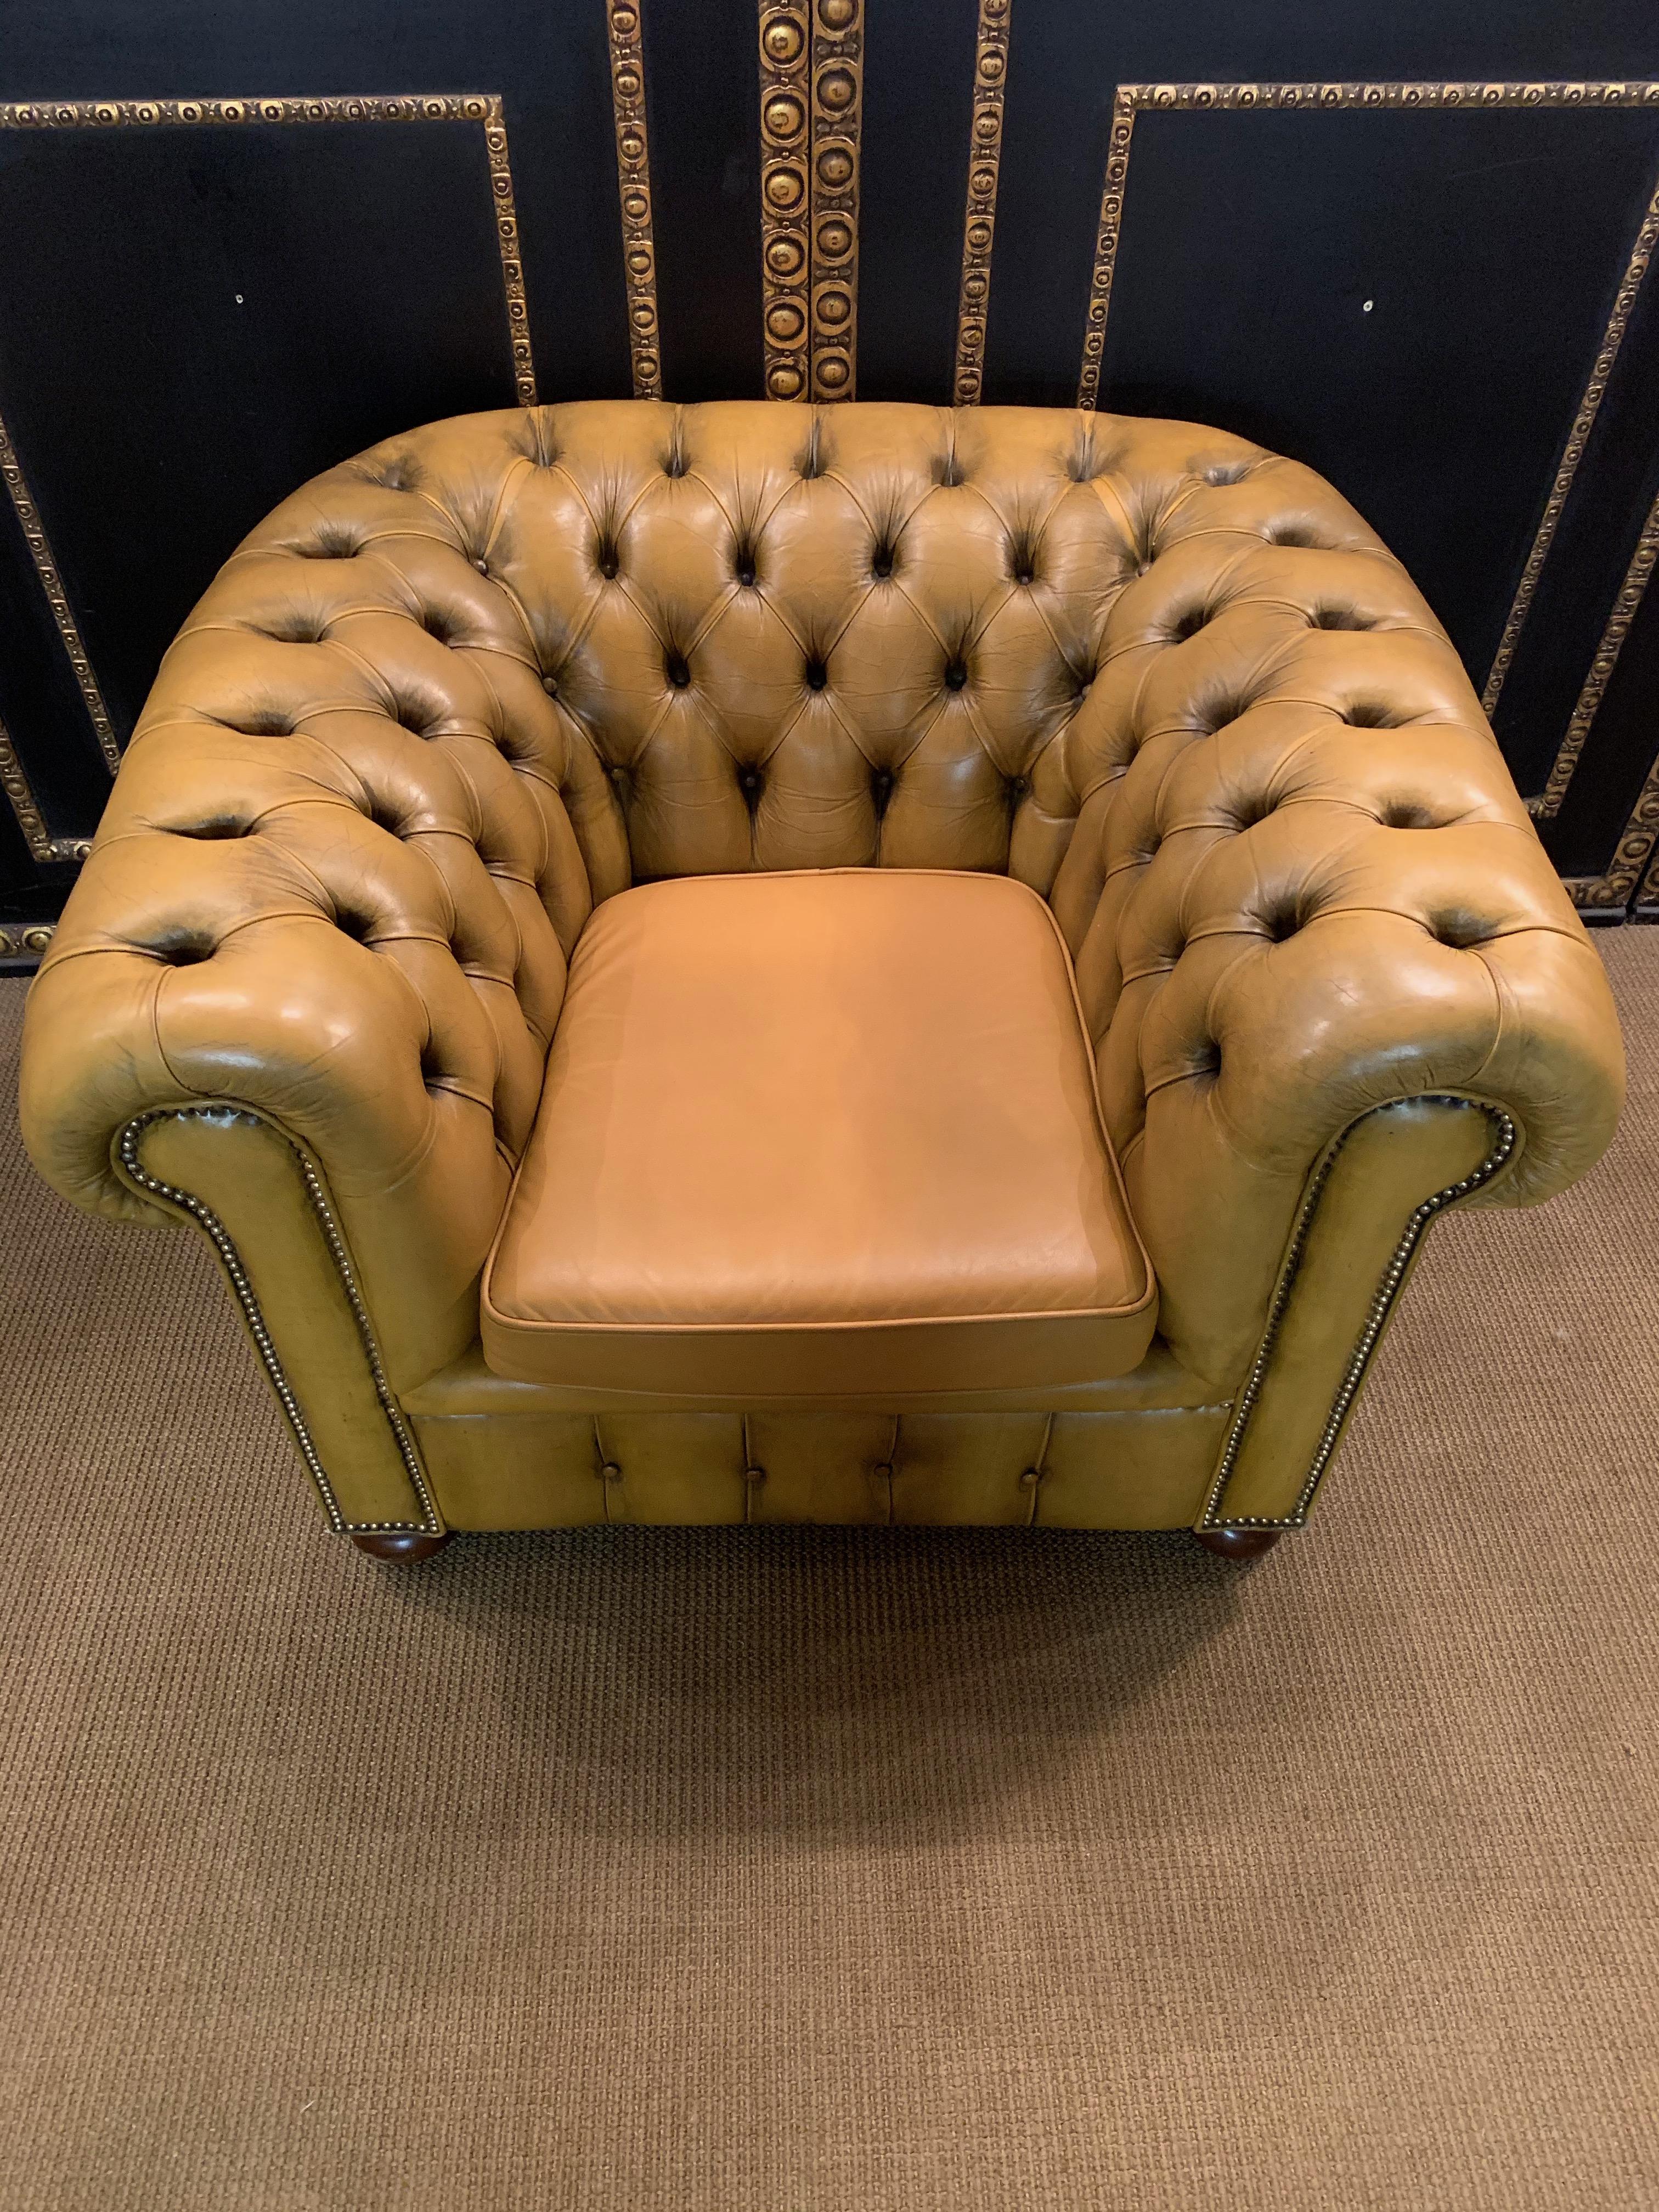 Mustard Yellow original Leather Chesterfield Club Suite set Armchair and Sofa 8